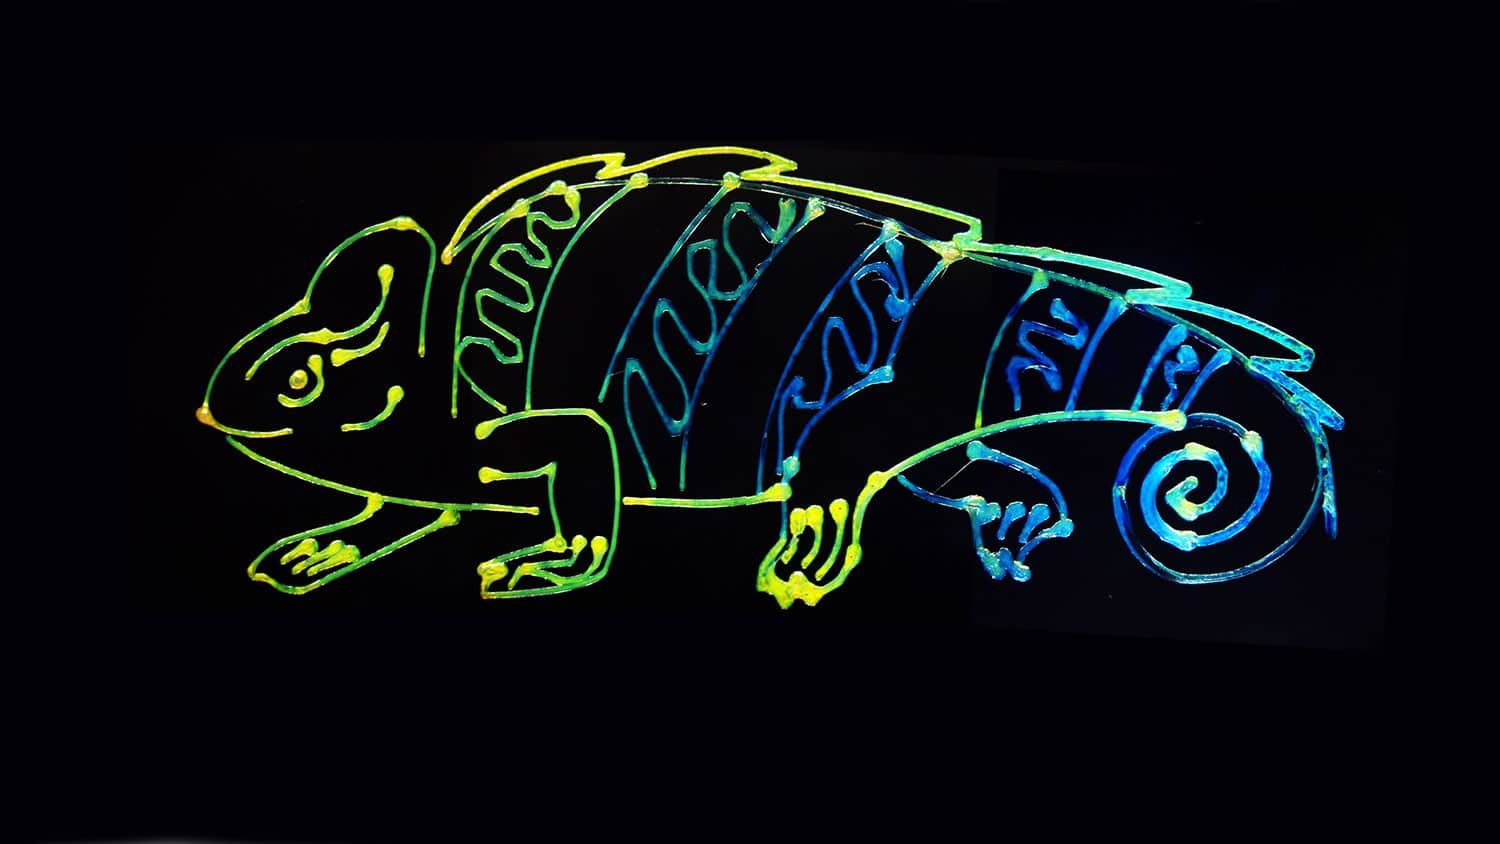 💥 This technology, inspired by chameleons, enables multicolor printing using just one ink